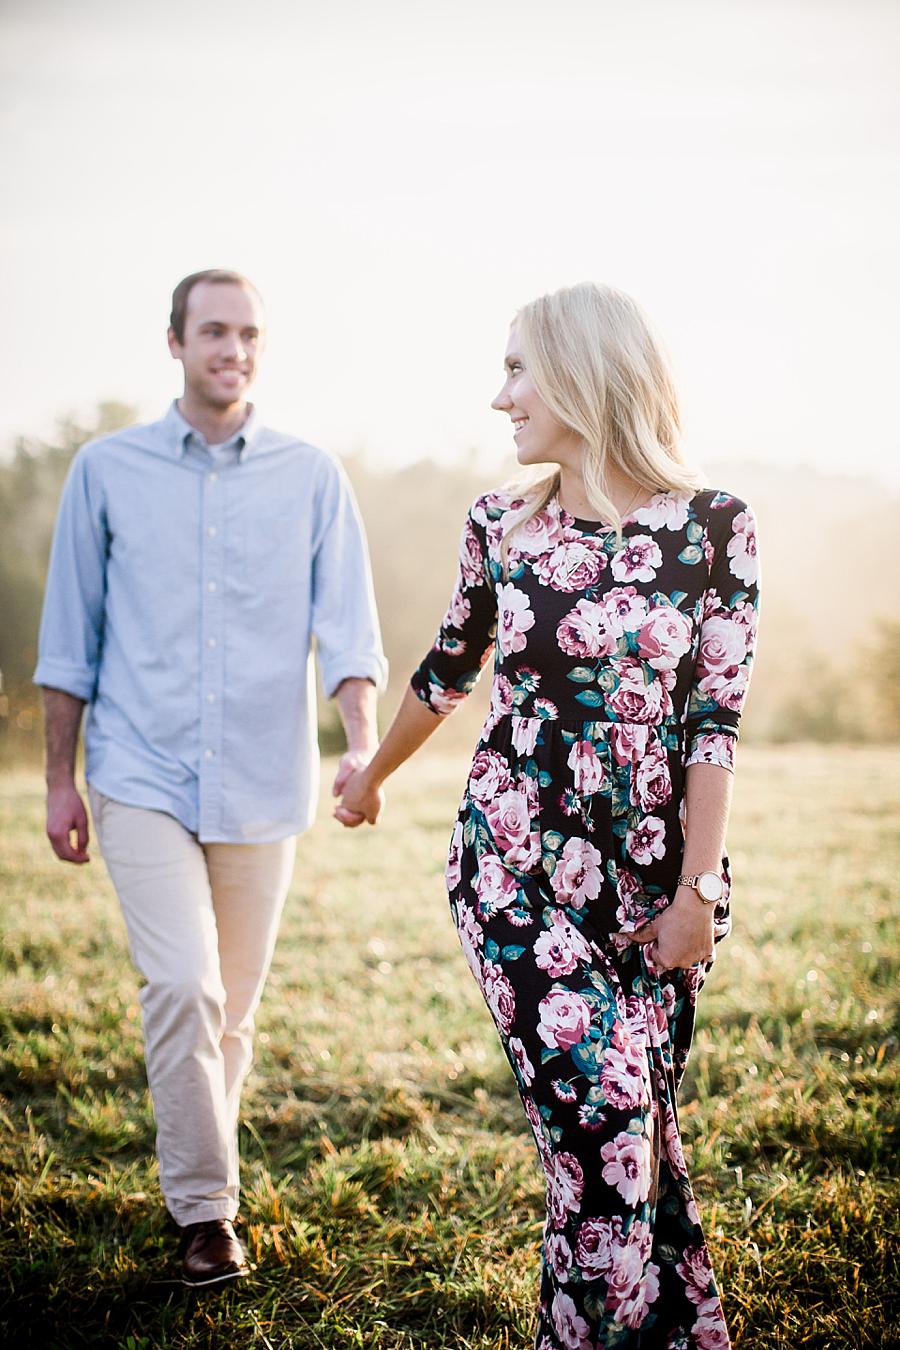 Walking together at this Family Farm Engagement Session by Knoxville Wedding Photographer, Amanda May Photos.